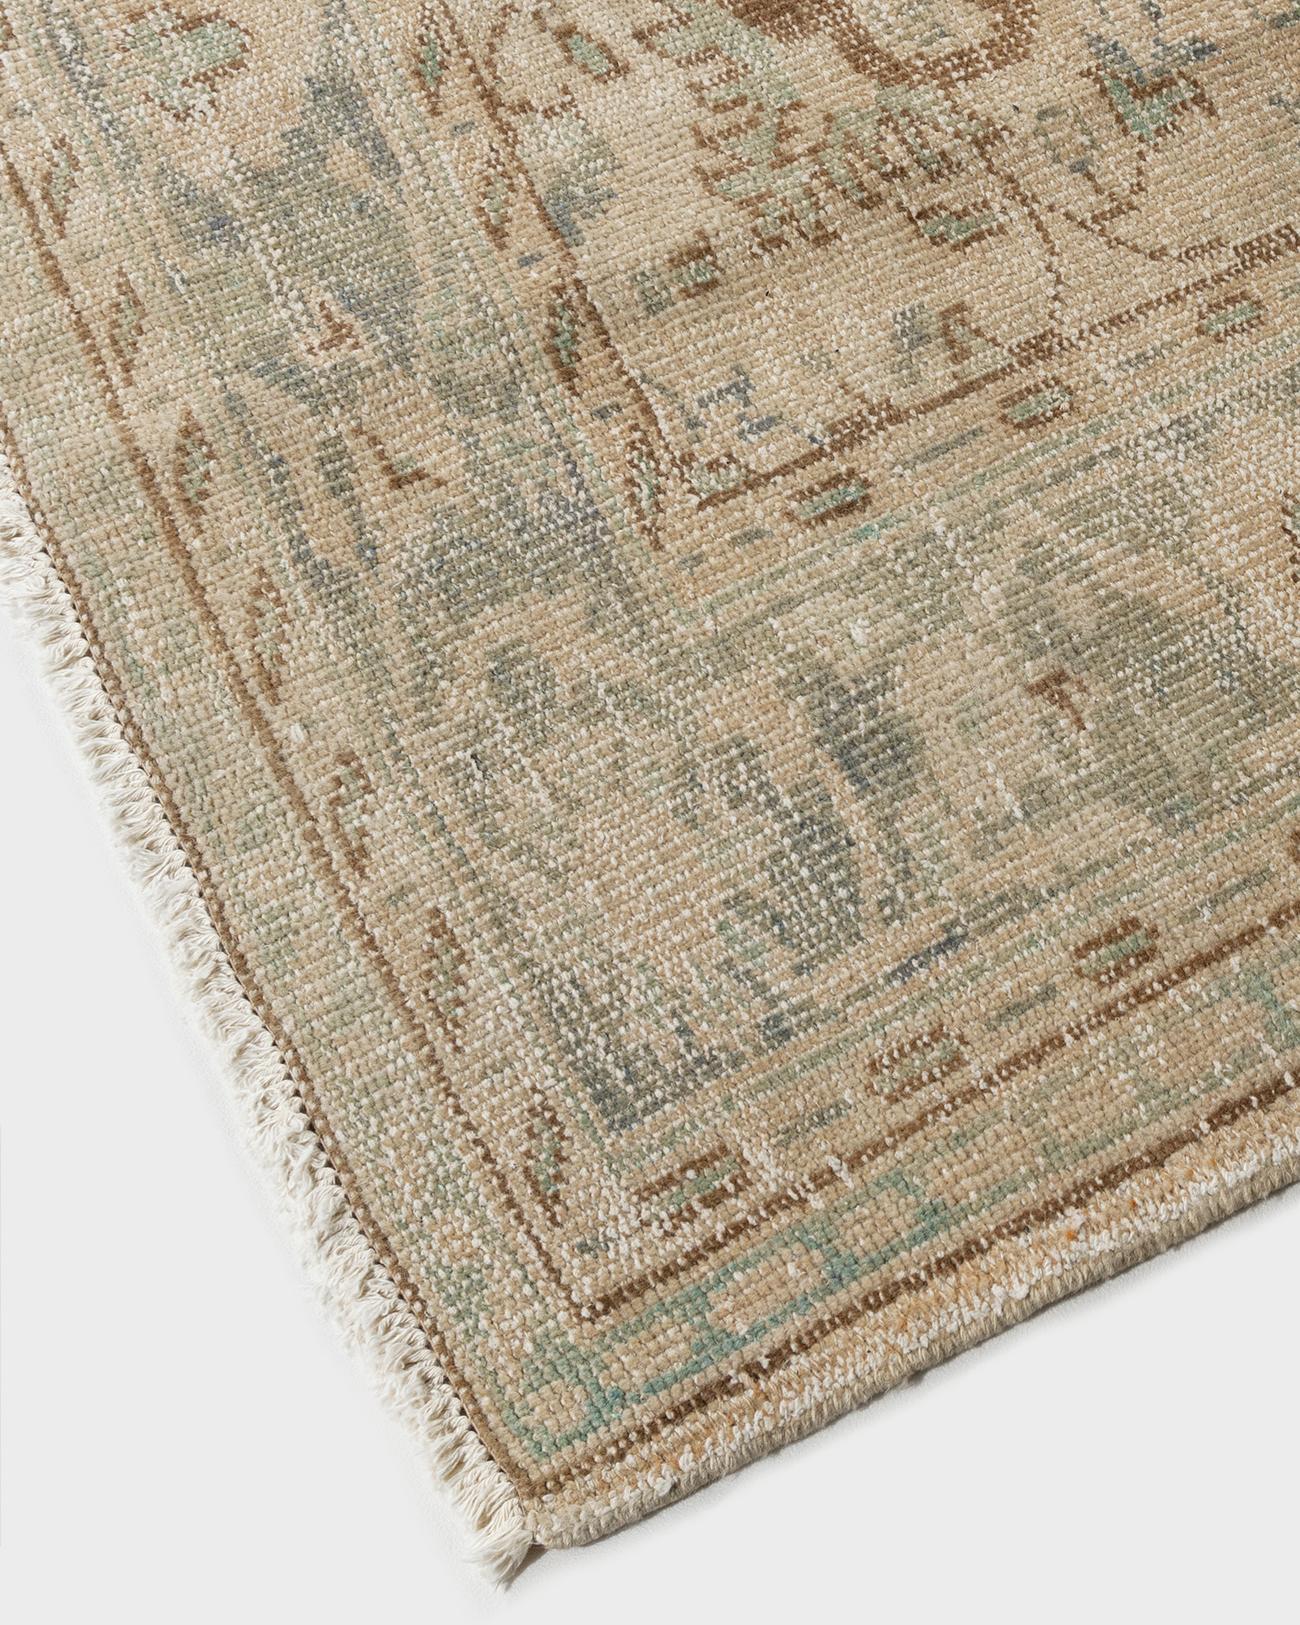 20th Century Vintage Distressed Turkish Oushak Rug 7'4 x 10'10 For Sale